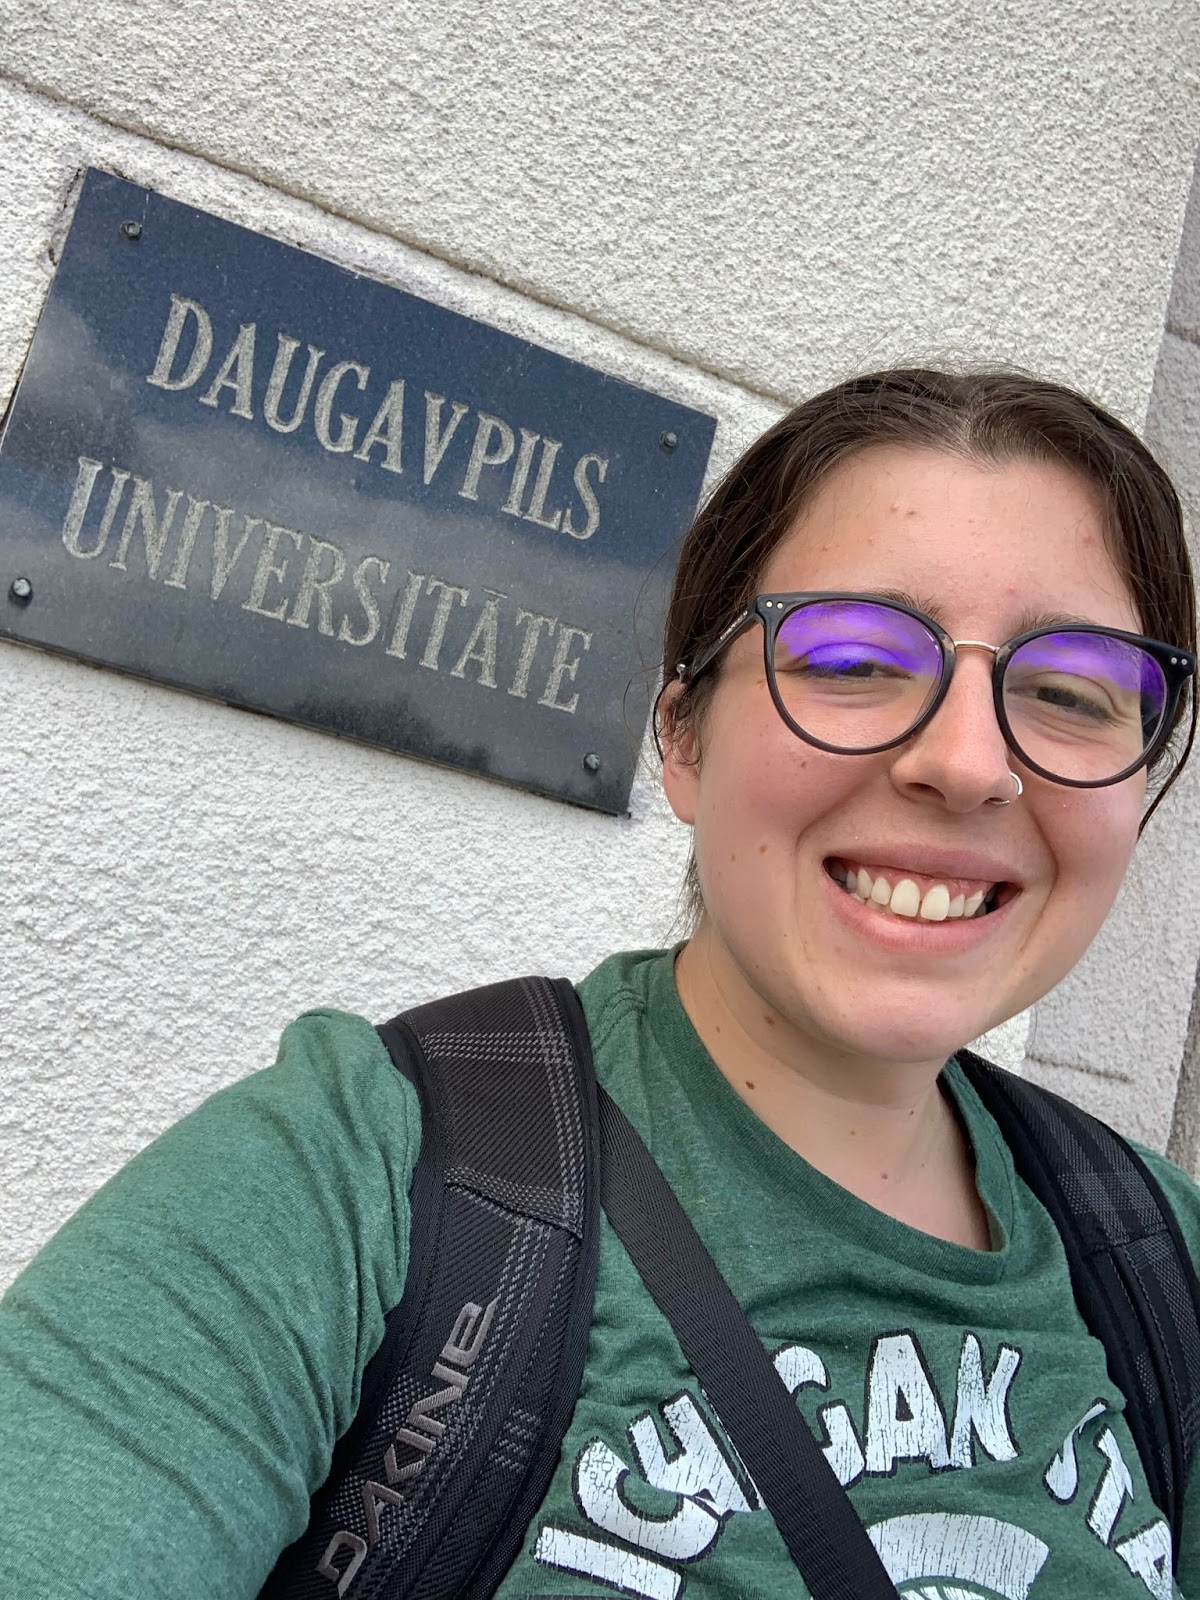 MSU student in front of a sign that says Daugavpils Universitate